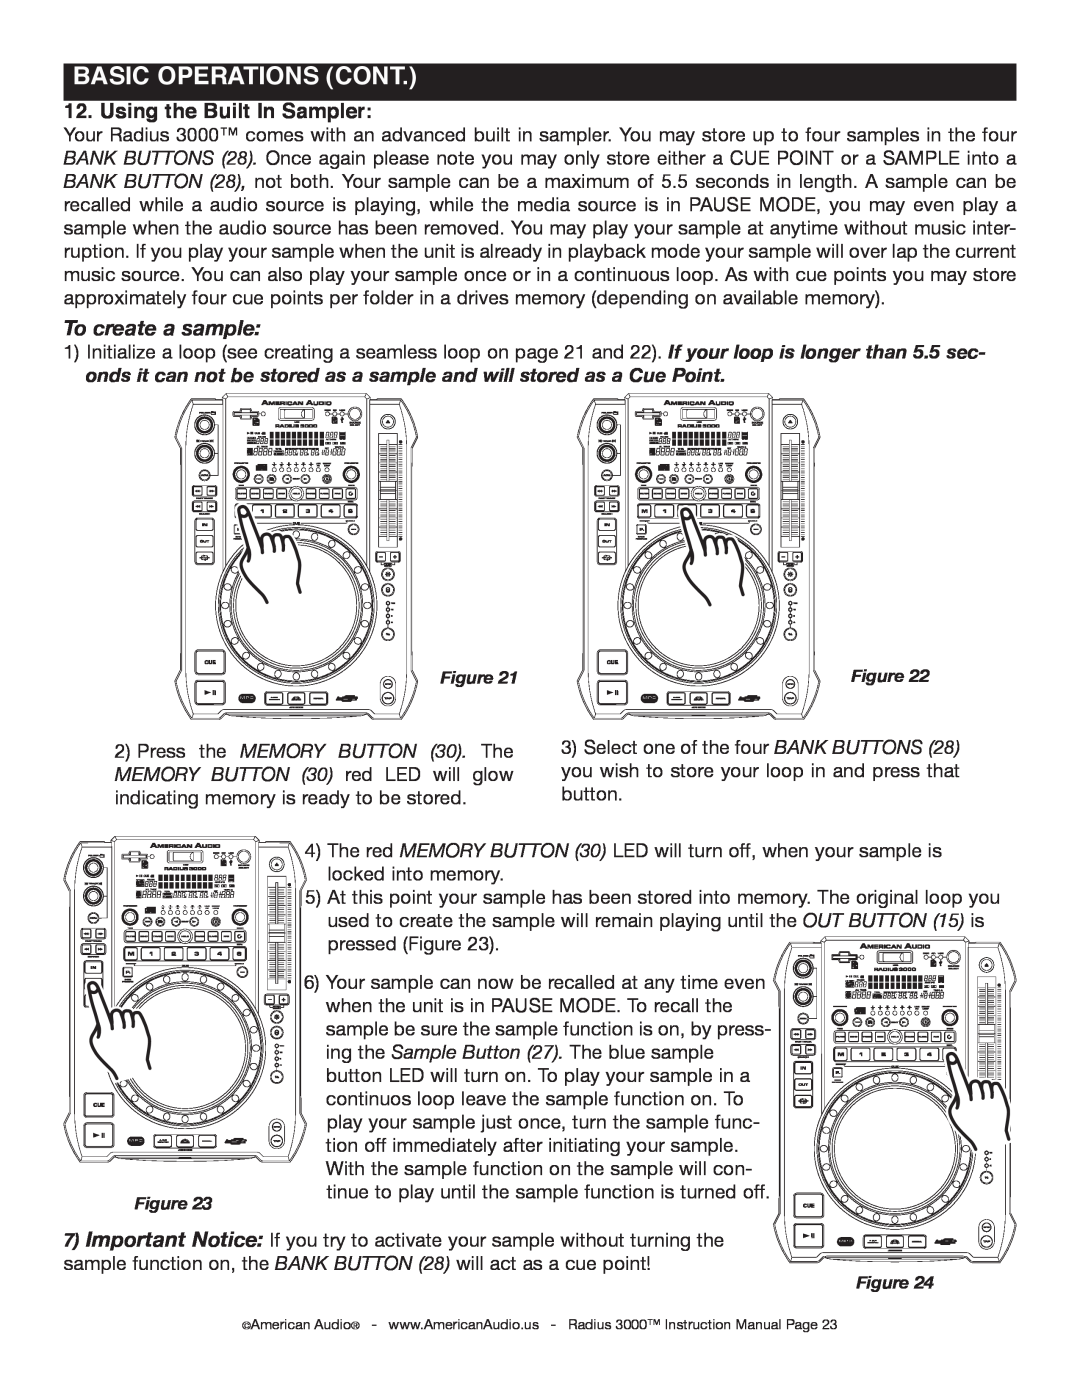 American Audio Radius 3000 manual Using the Built In Sampler, To create a sample, BASIC OPERATIONS Cont 